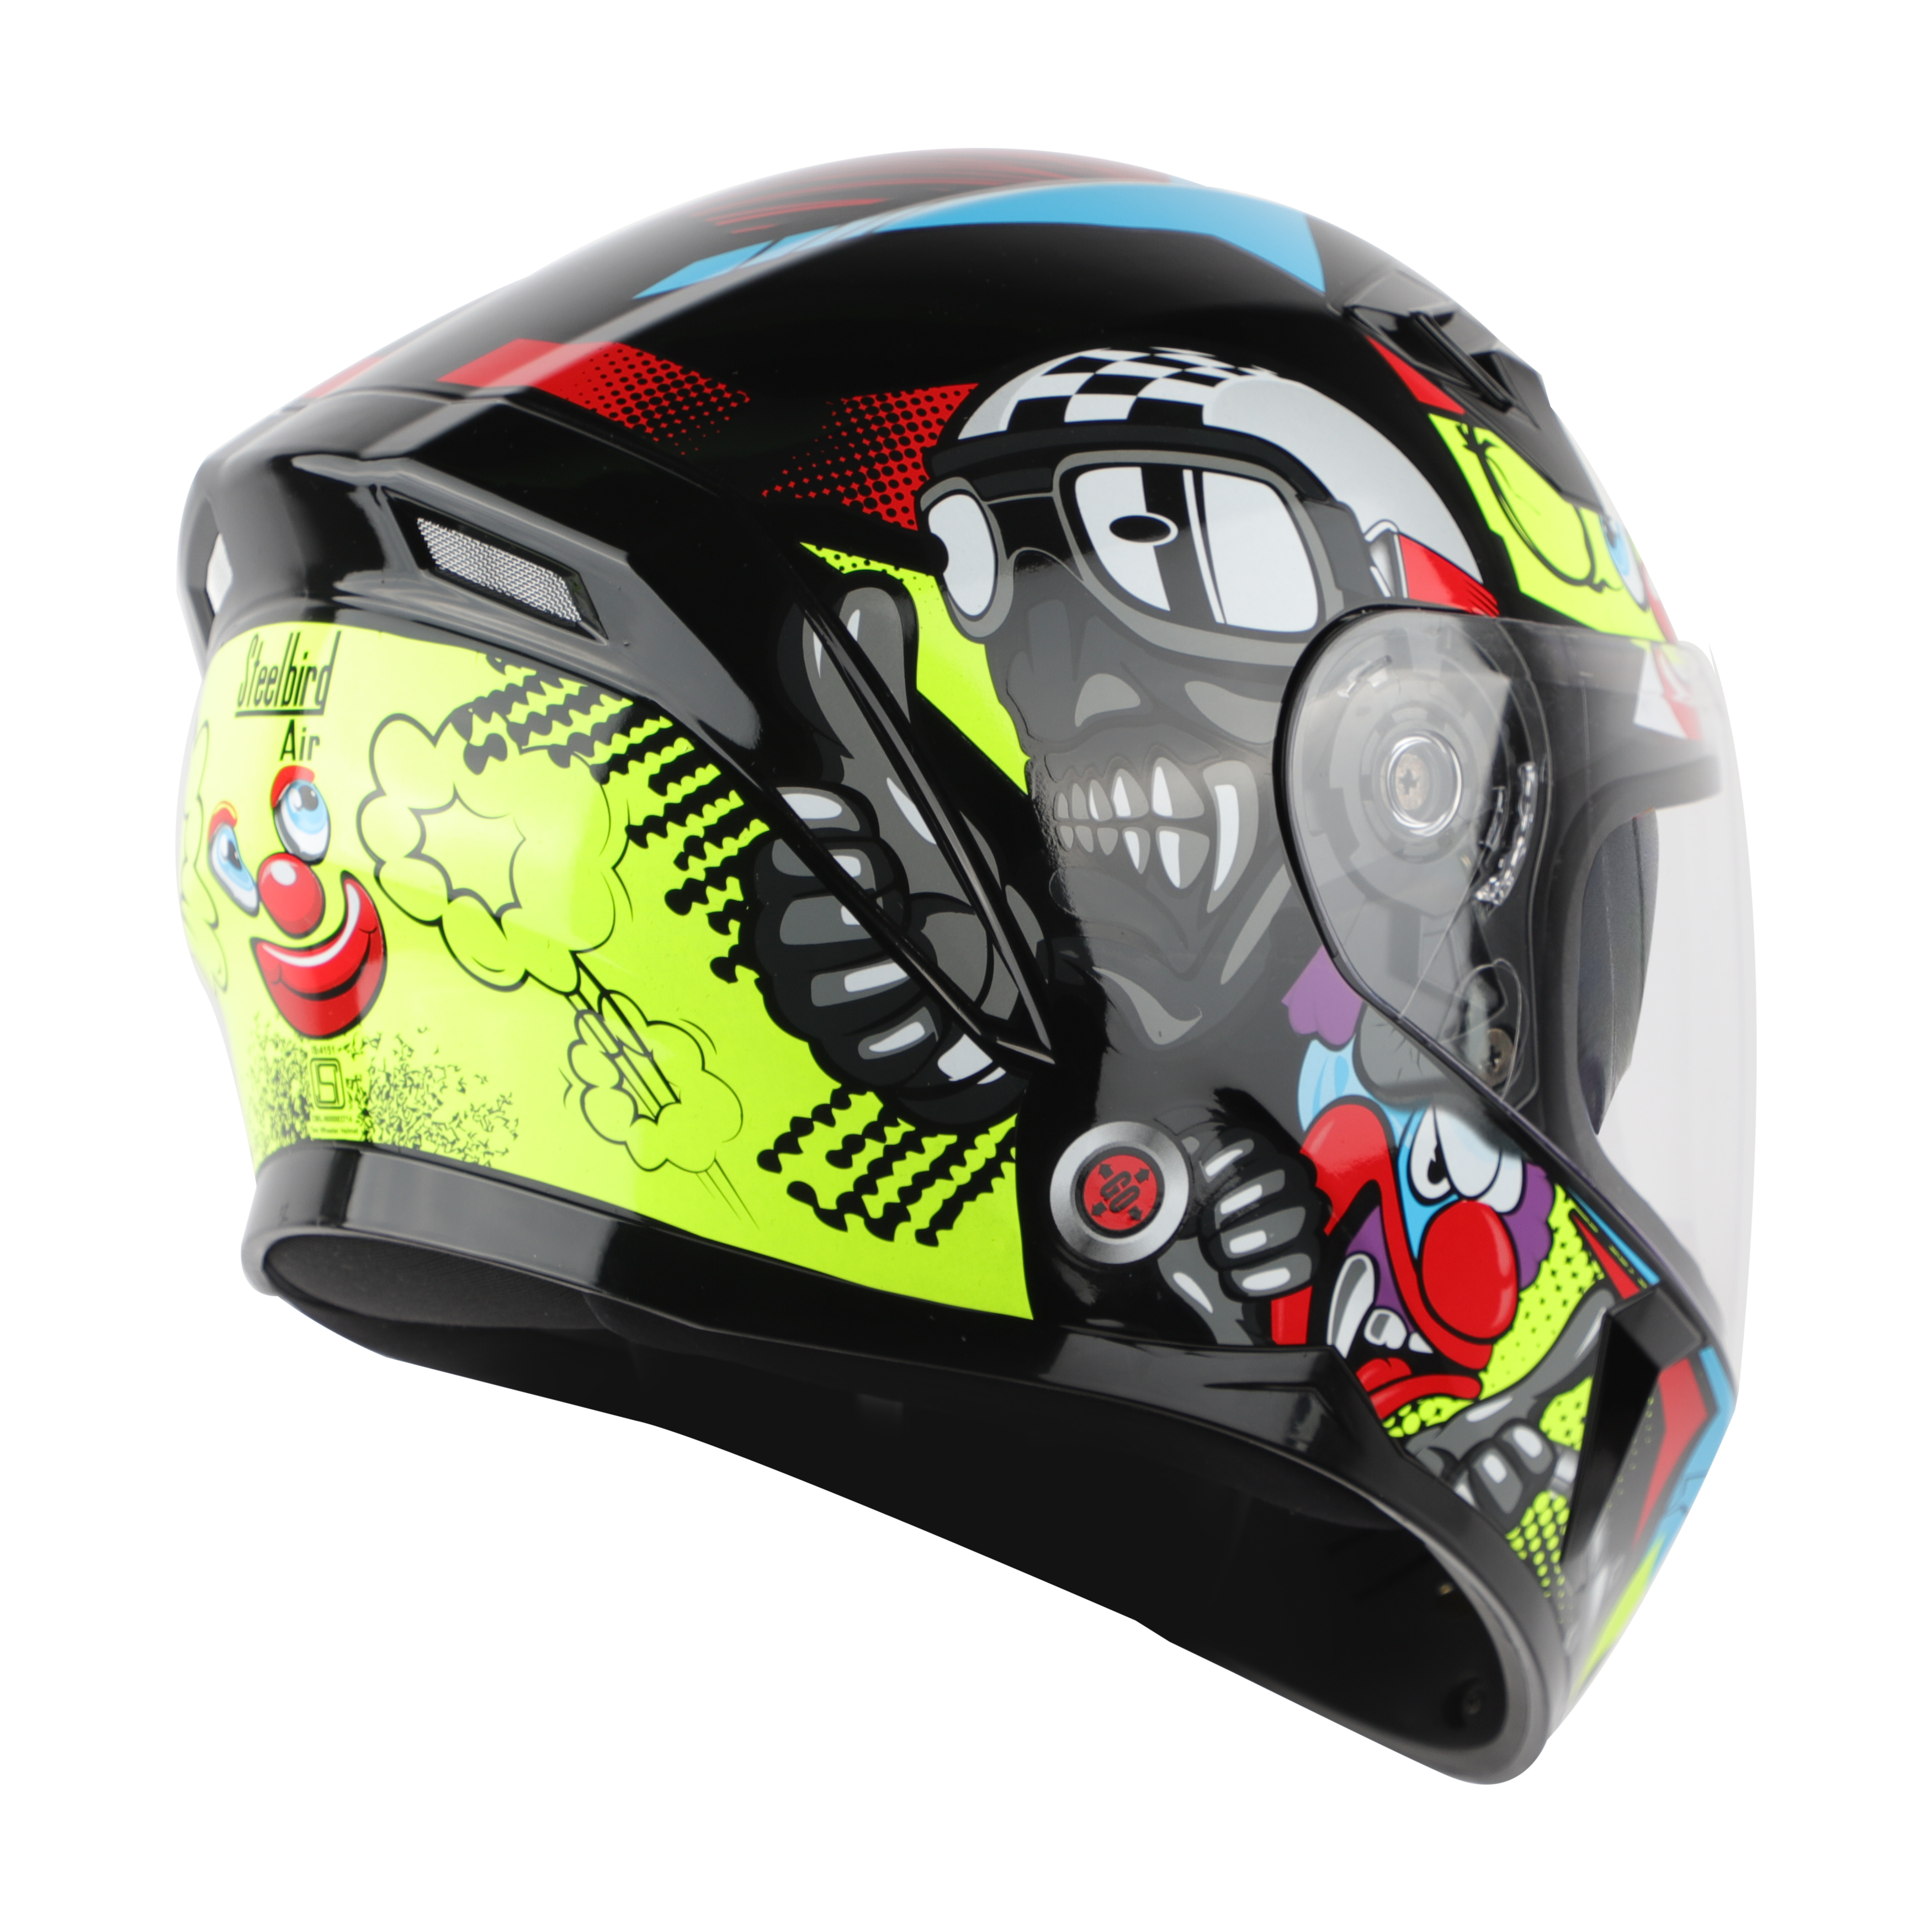 SBA-21 COMIC MAT BLACK WITH NEON ( WITH CHROME SILVER INNER SUN SHIELD)